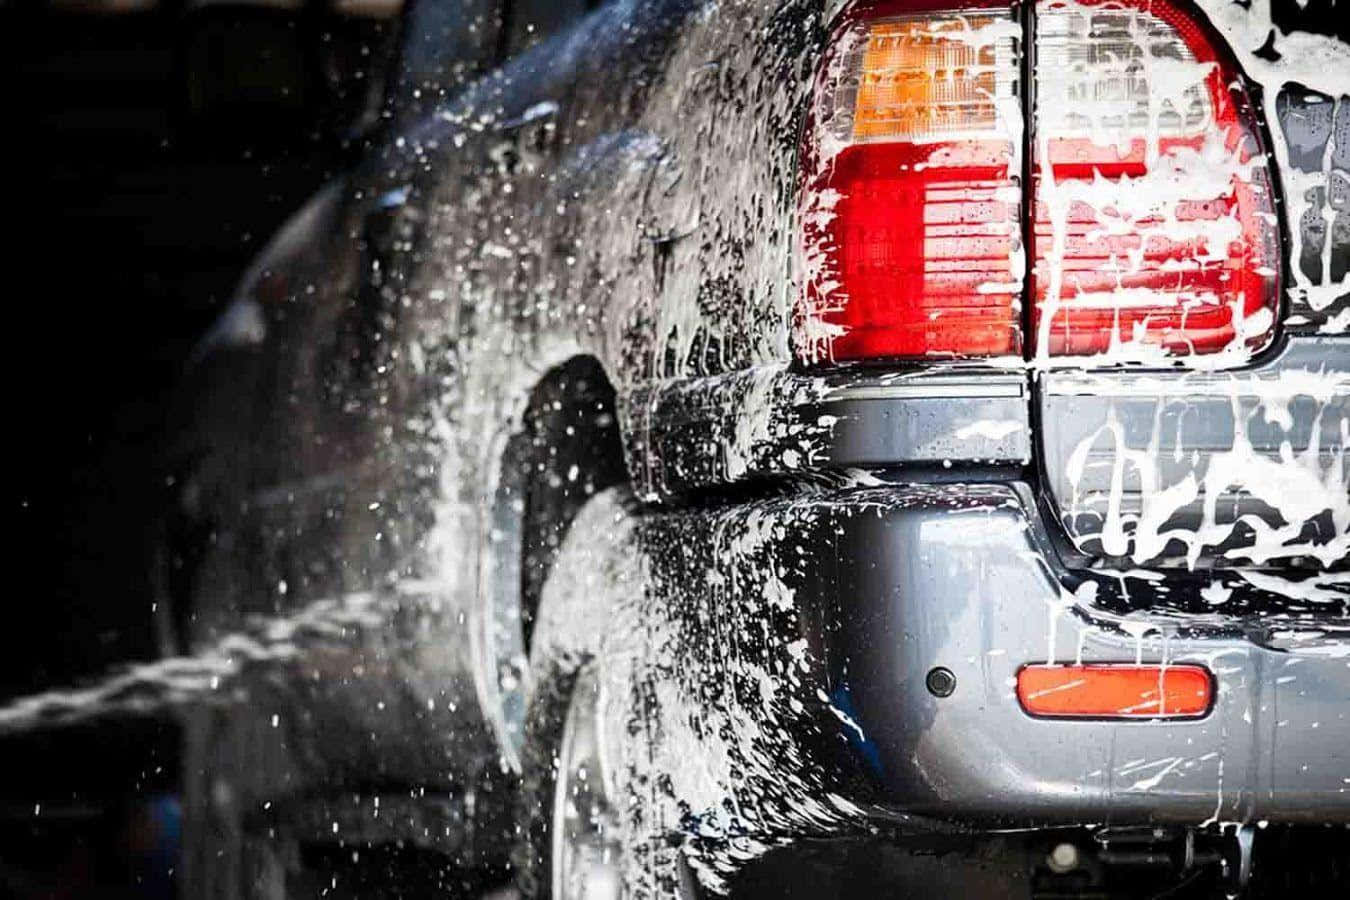 Get Your Car Clean and Shiny at a Professional Car Wash